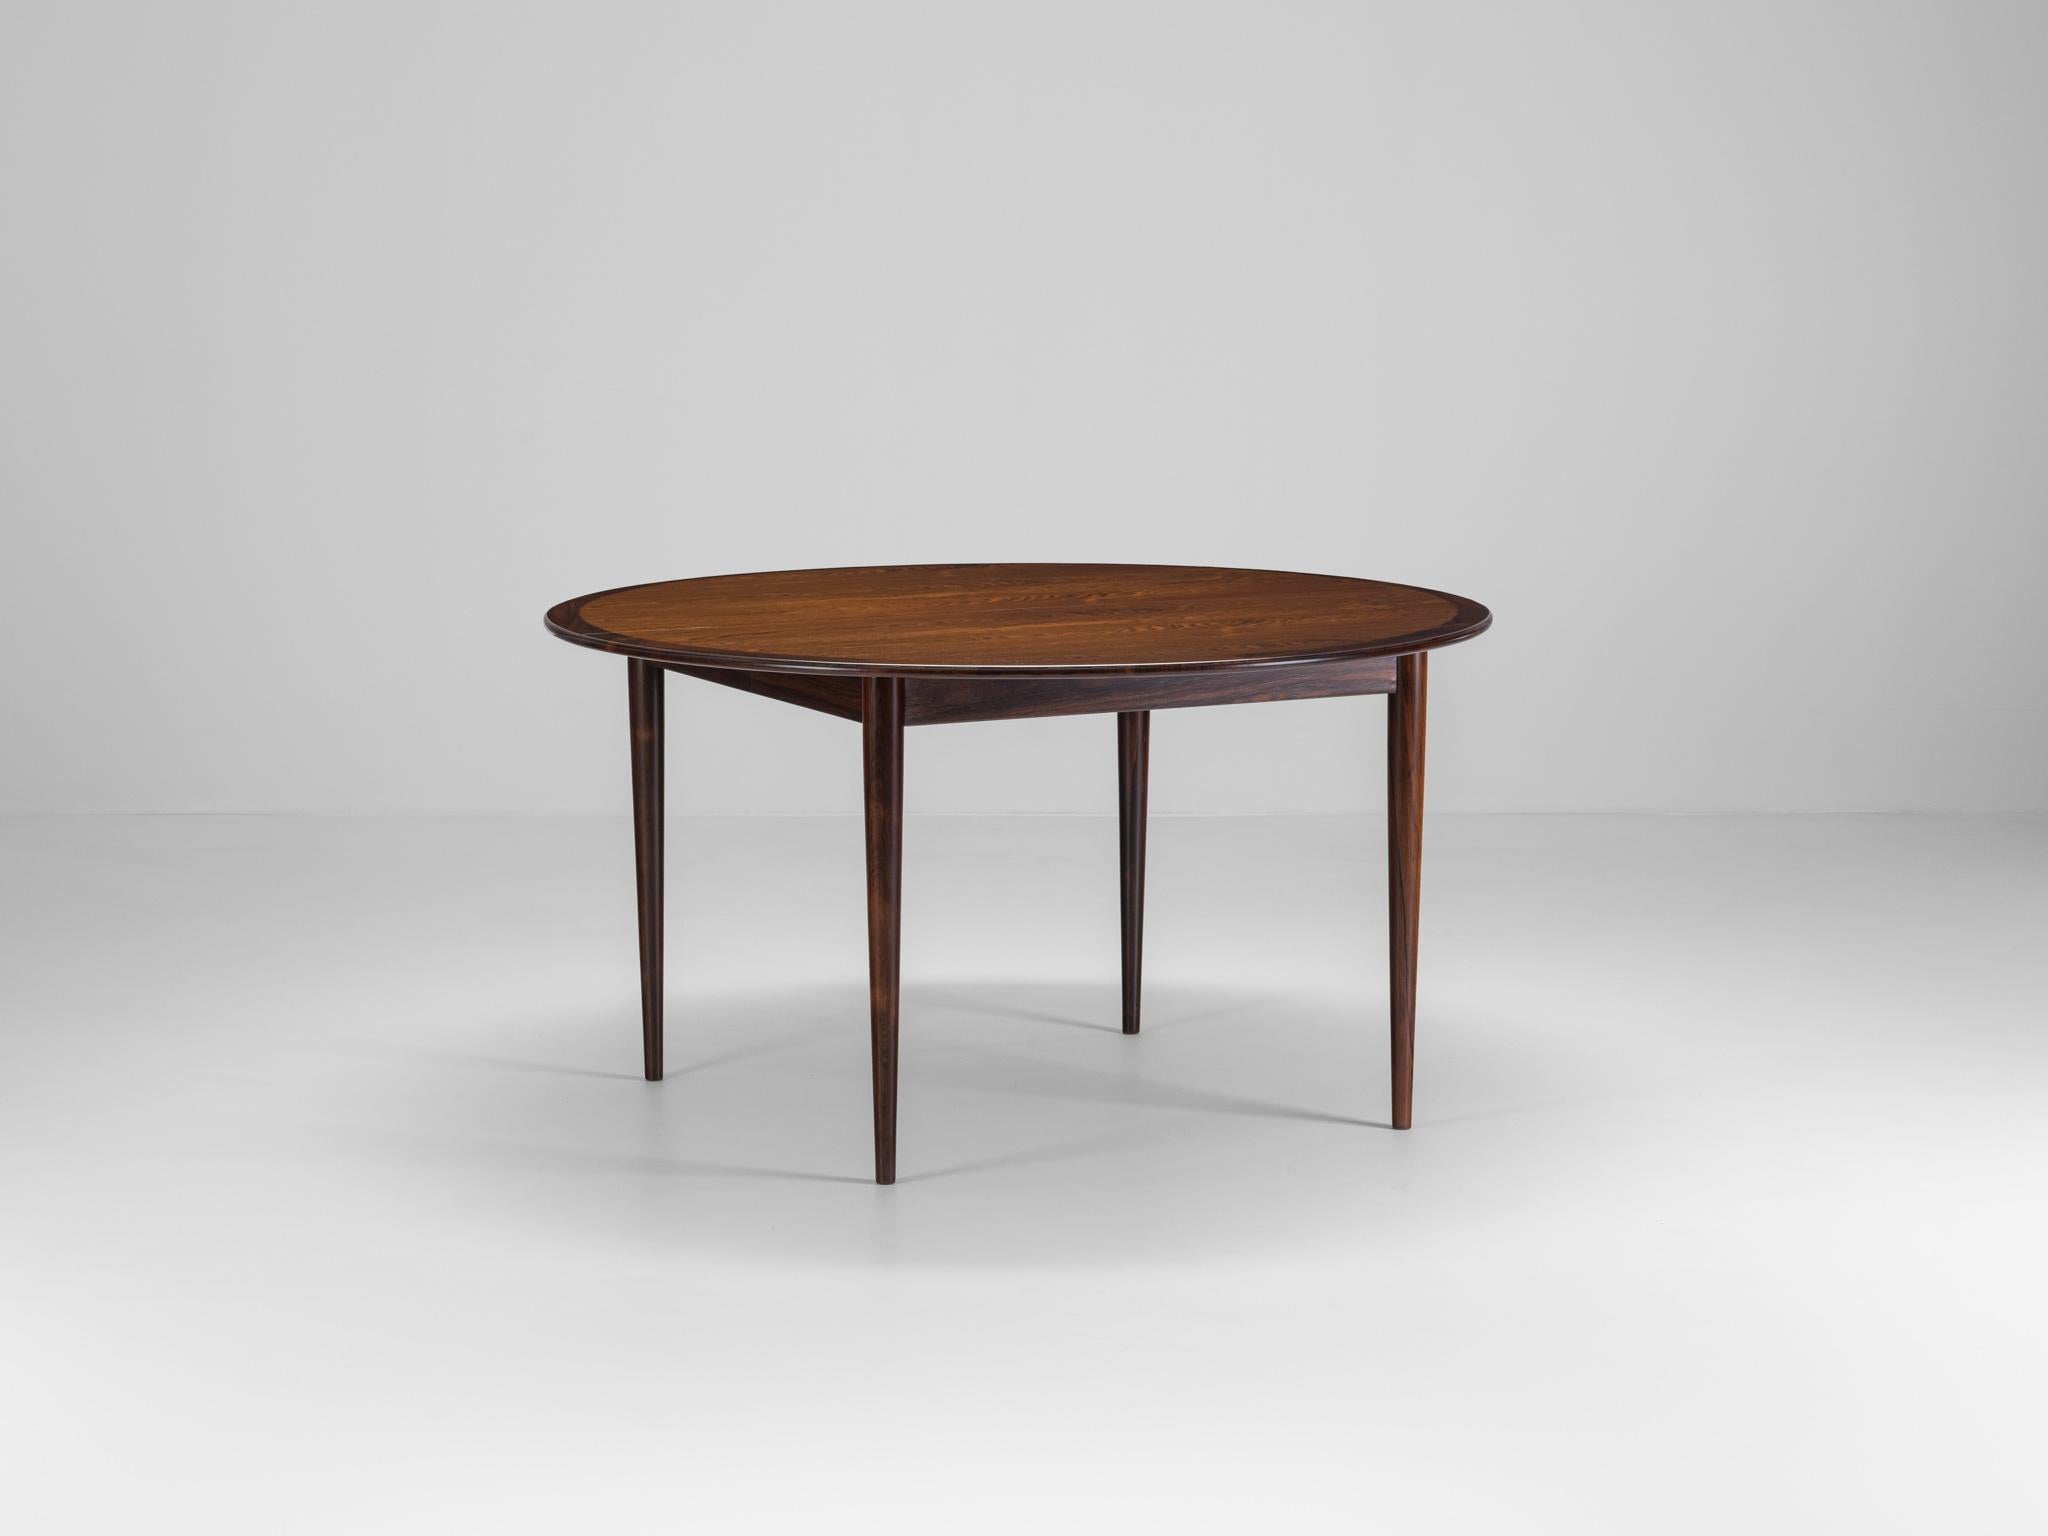 Rosewood dining table designed by Grete Jalk and Produced by P. Jeppesens møbelfabrik in Denmark c 1960

The table is round with very large diameter of 136 cm, and have two extension leafs with 136x55 cm each. 
Both extra leafs have the sarg and